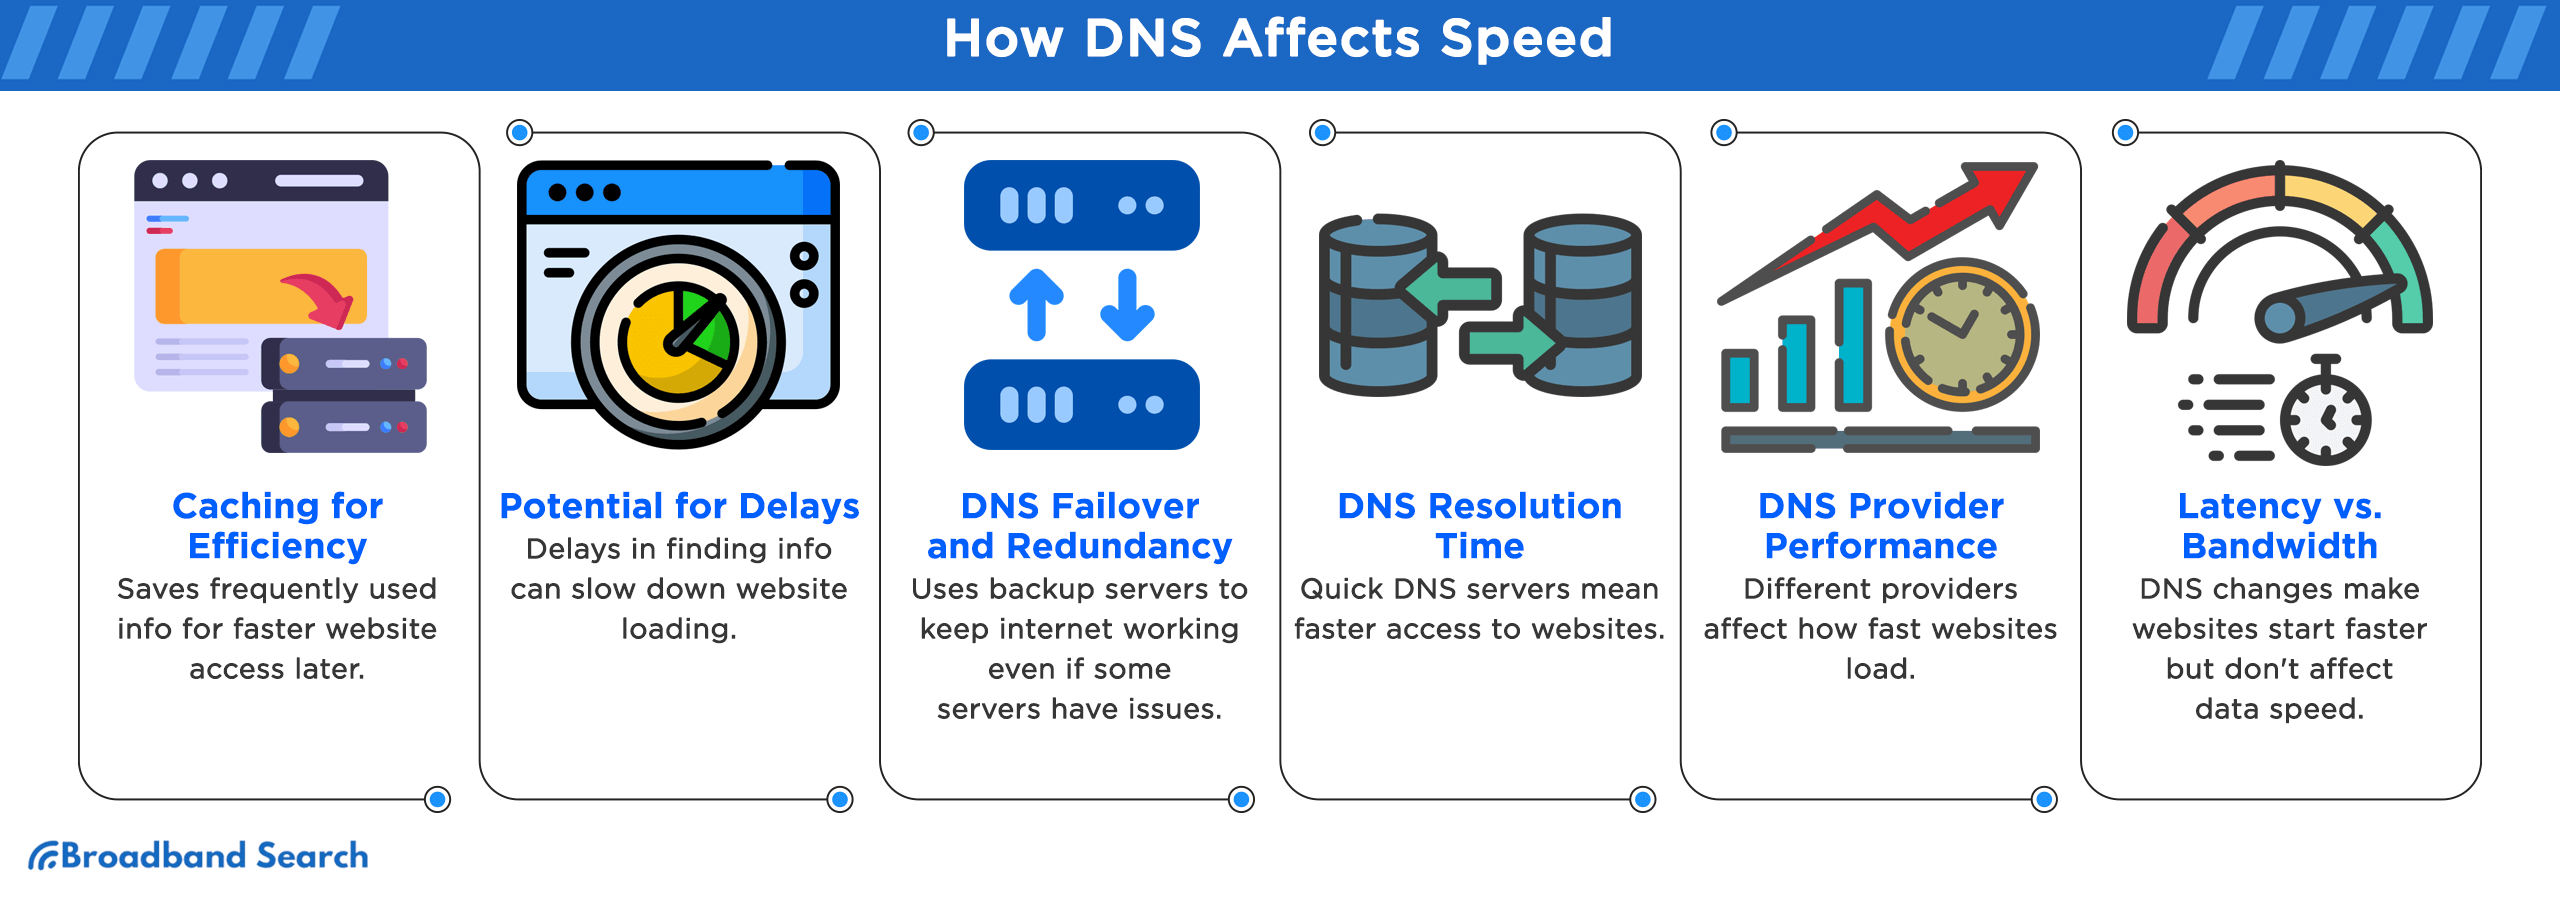 How DNS affects speed